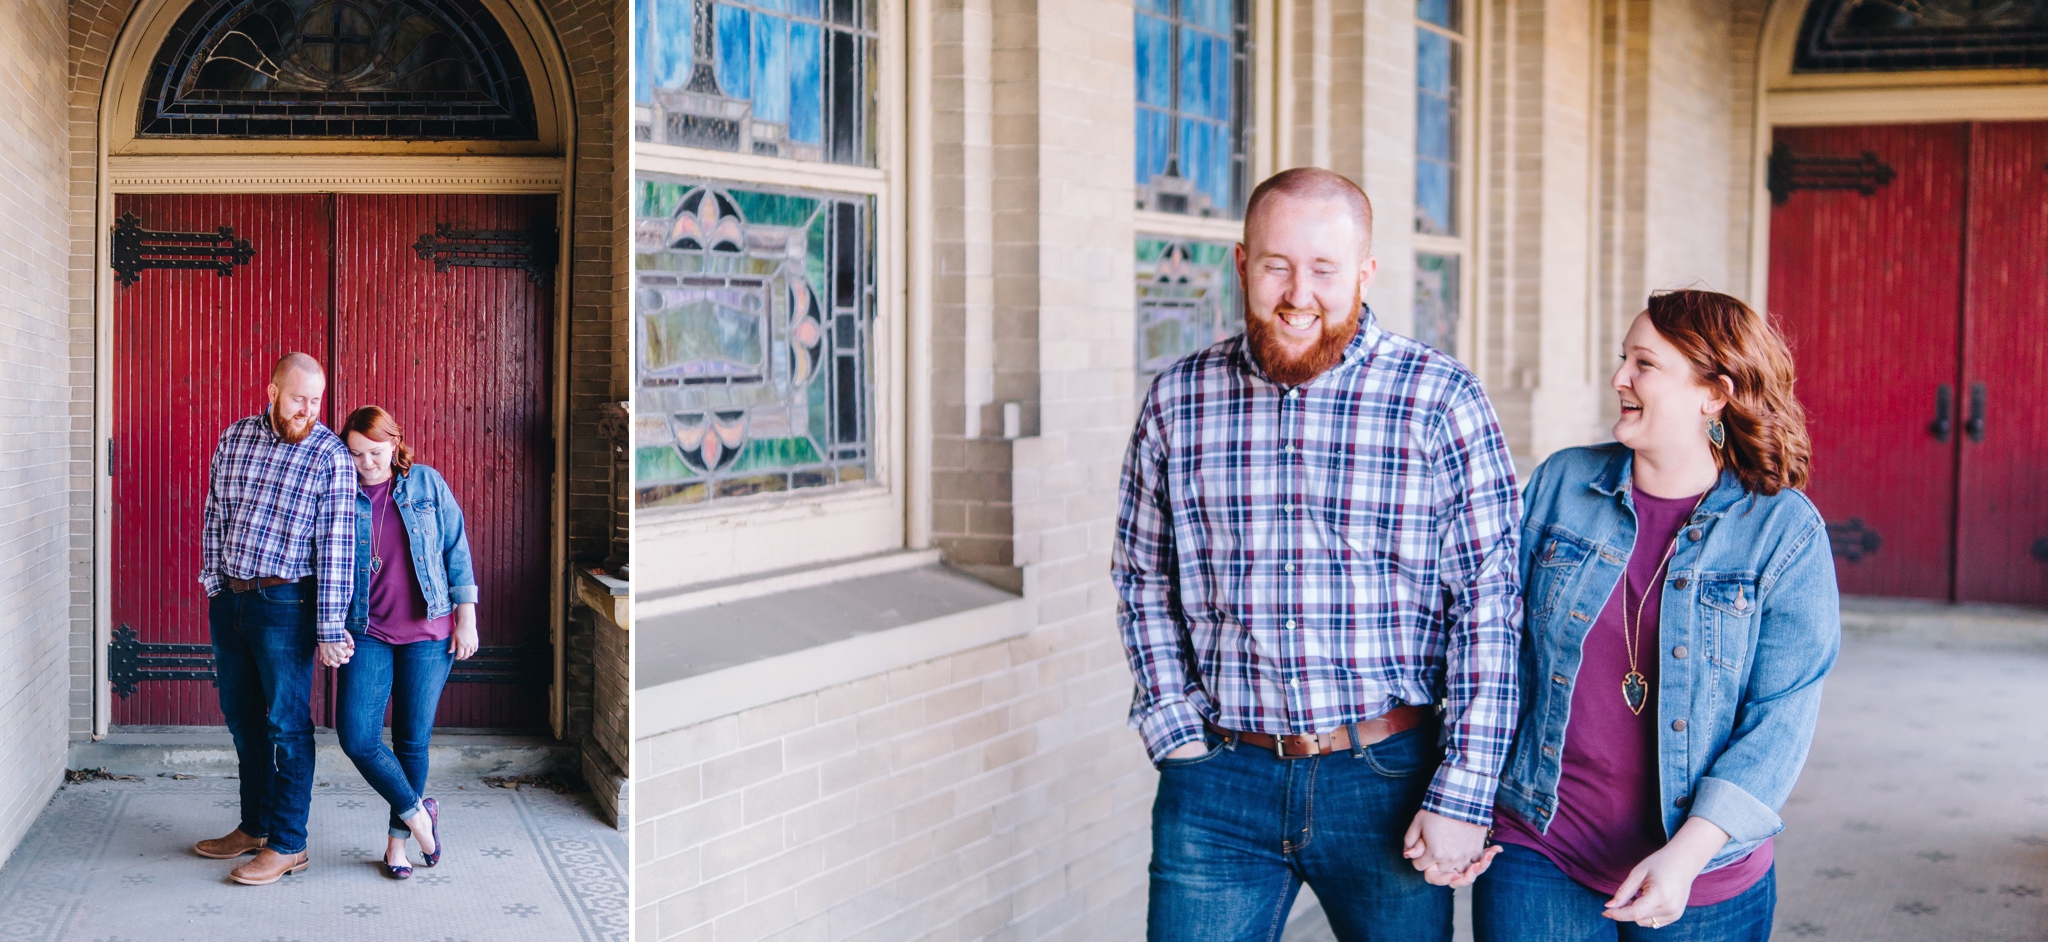 downtown lynchburg virginia engagement session by jonathan hannah photography